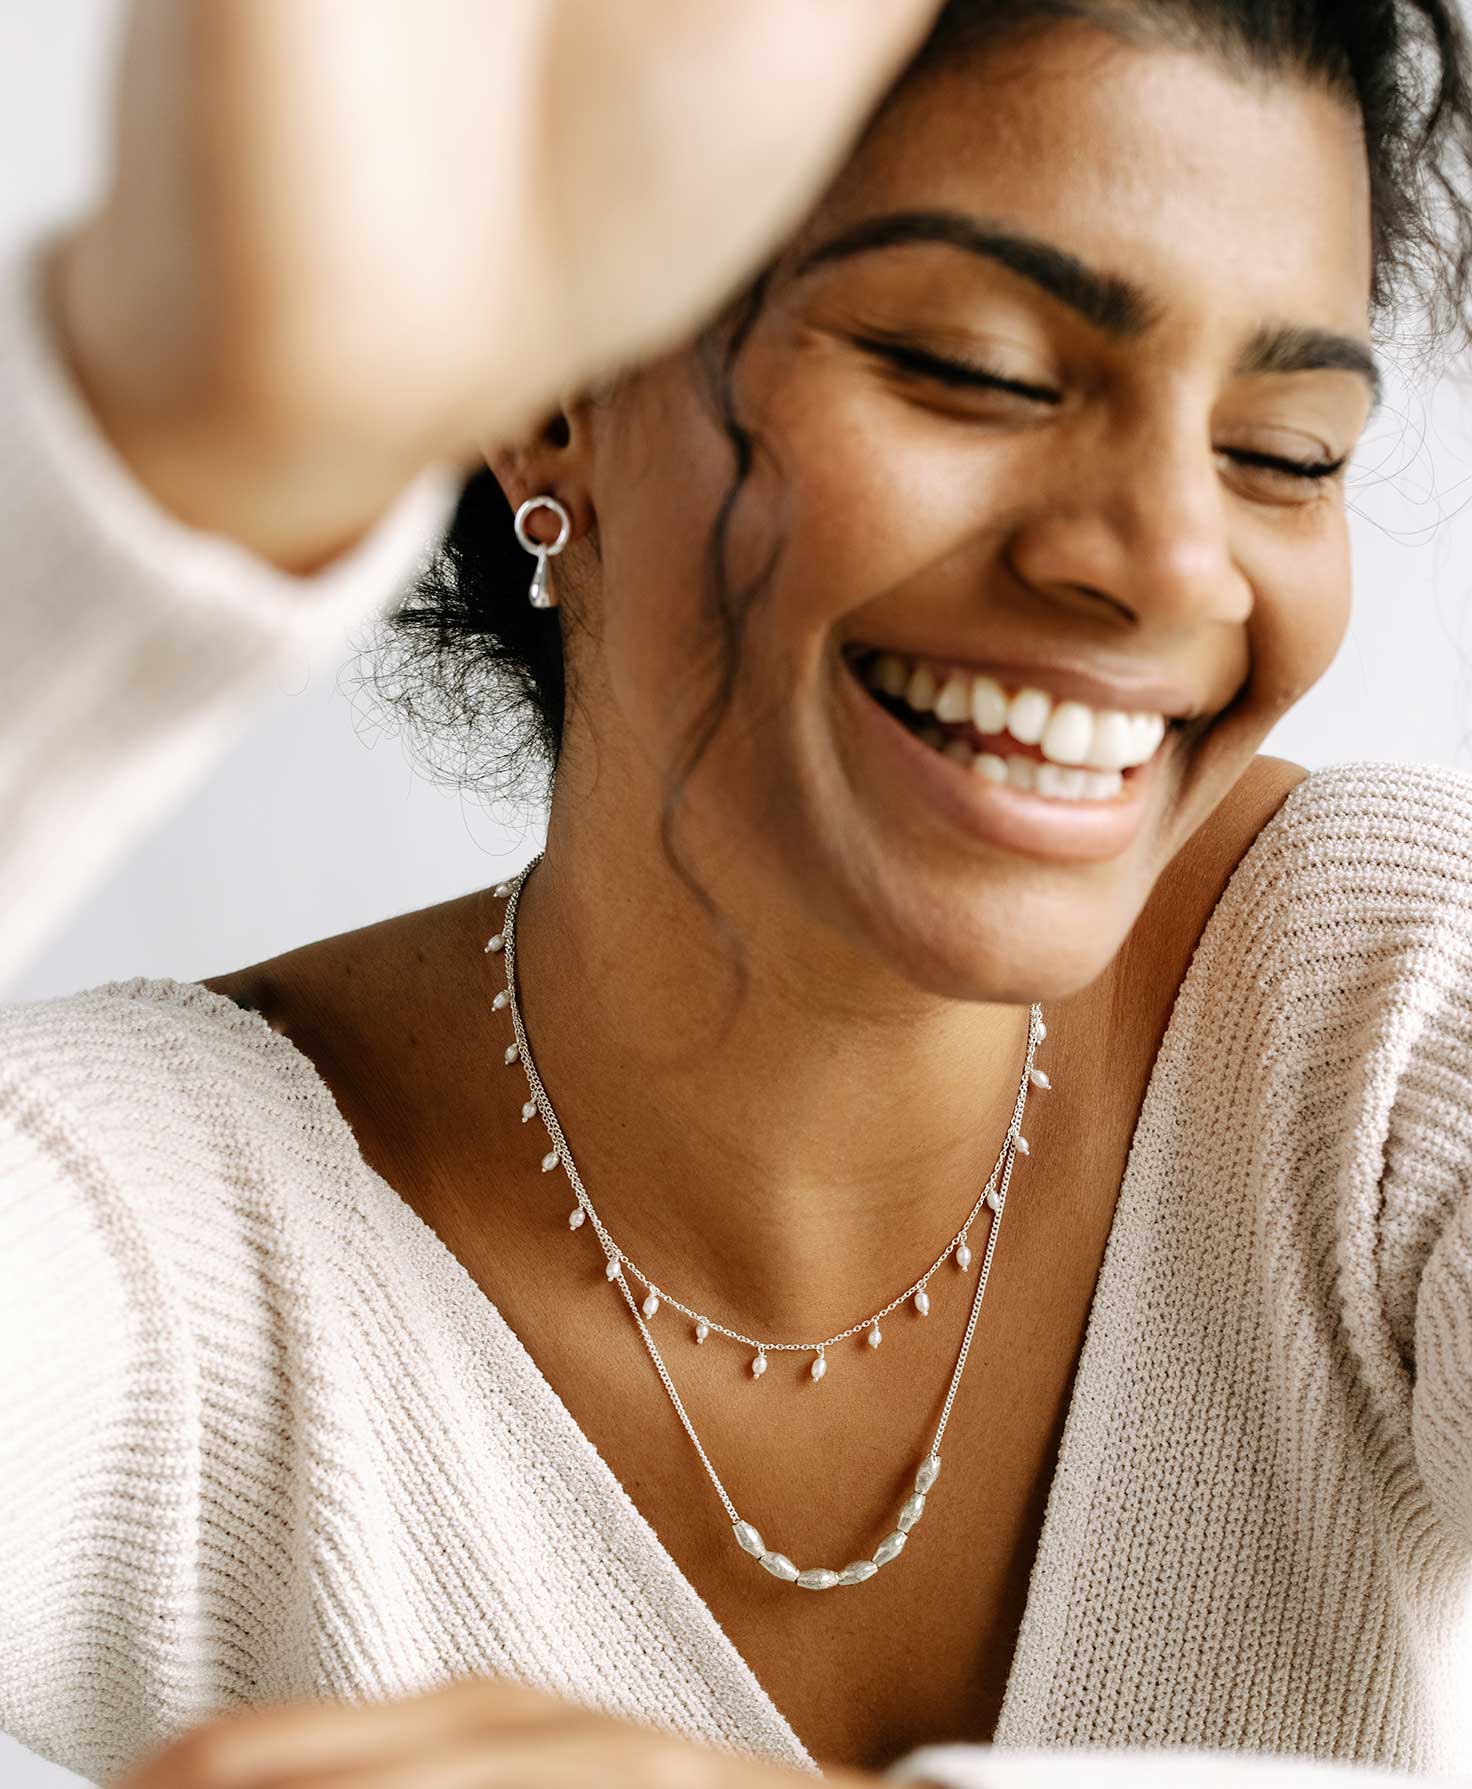 A model wears the Dew Drop Necklace layered with the Harmonize Necklace, another dainty silver necklace. To complete her sophisticated silver look, she wears a pair of earrings from the Silver Drop Earrings set.